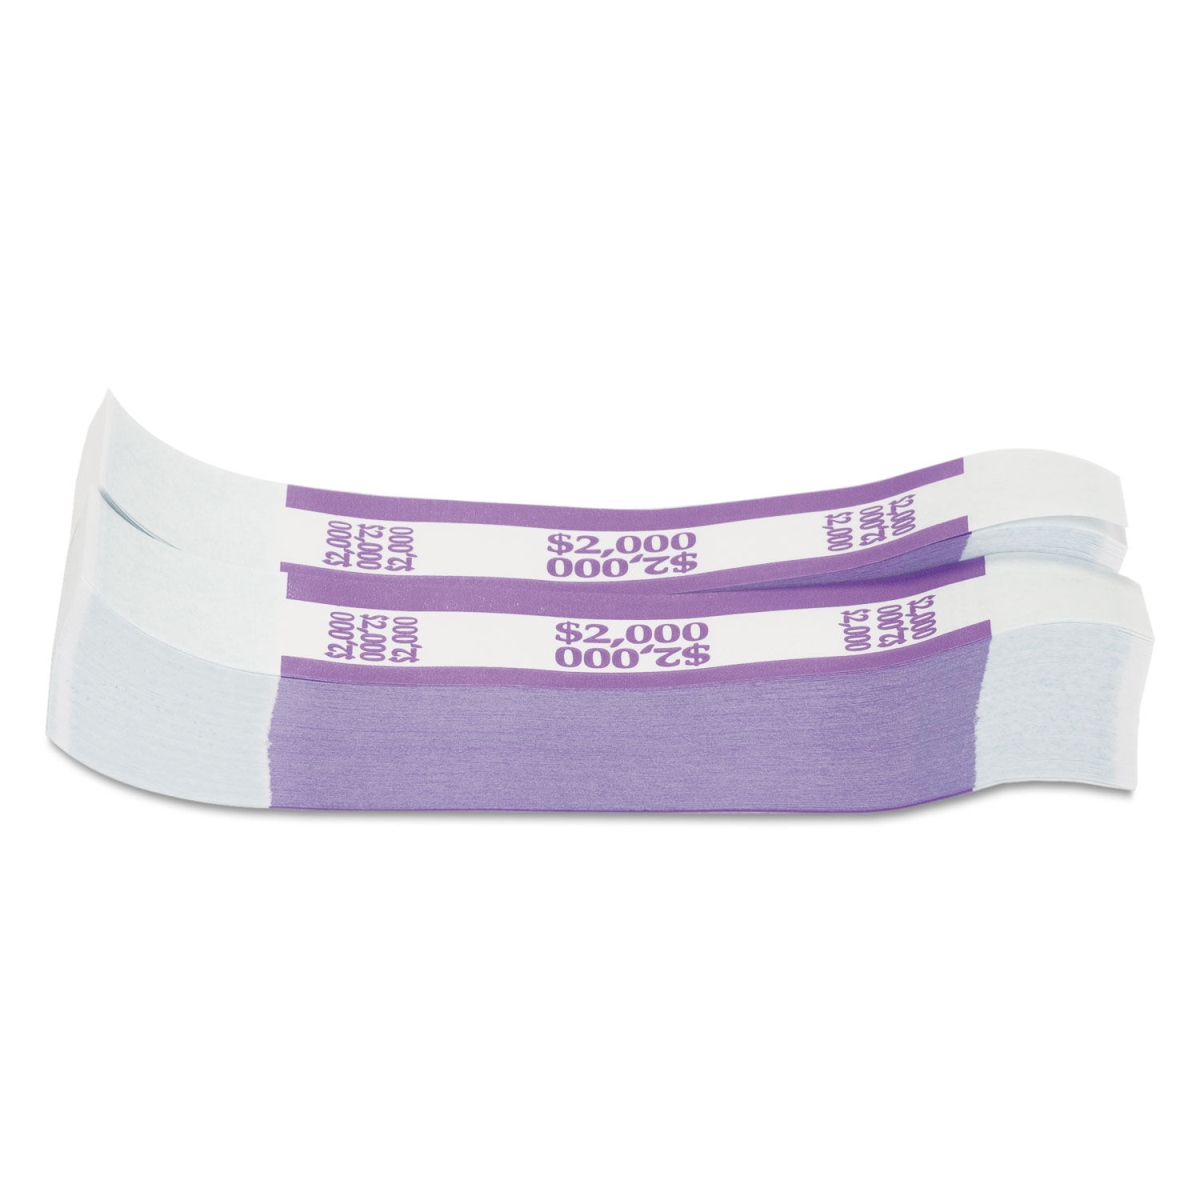 Picture of Pap CTX402000 2000 Dollar Bills Currency Strap, Violet